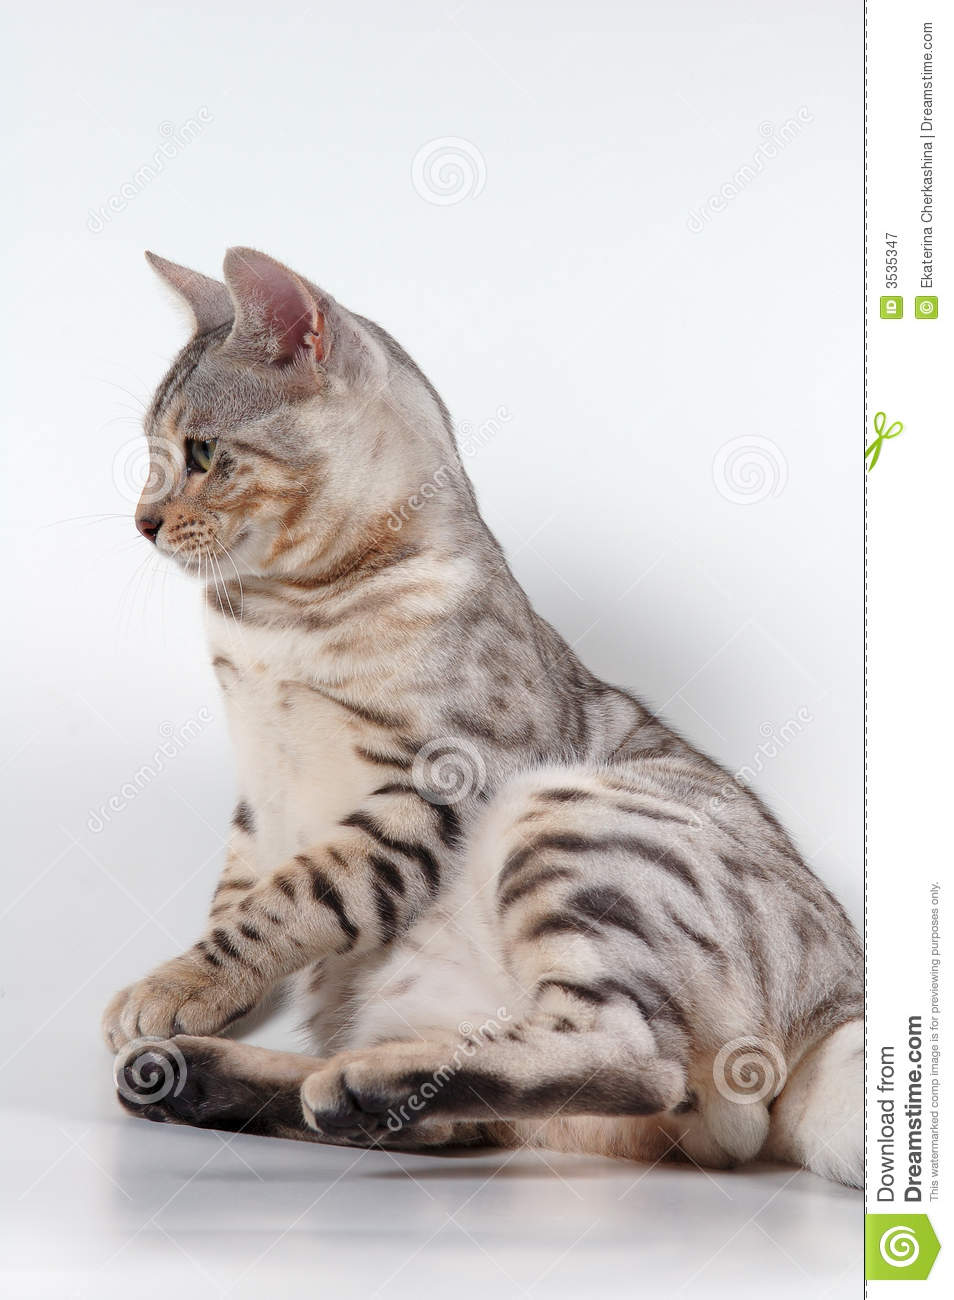 Spotted Cat Of Bengals Breed 